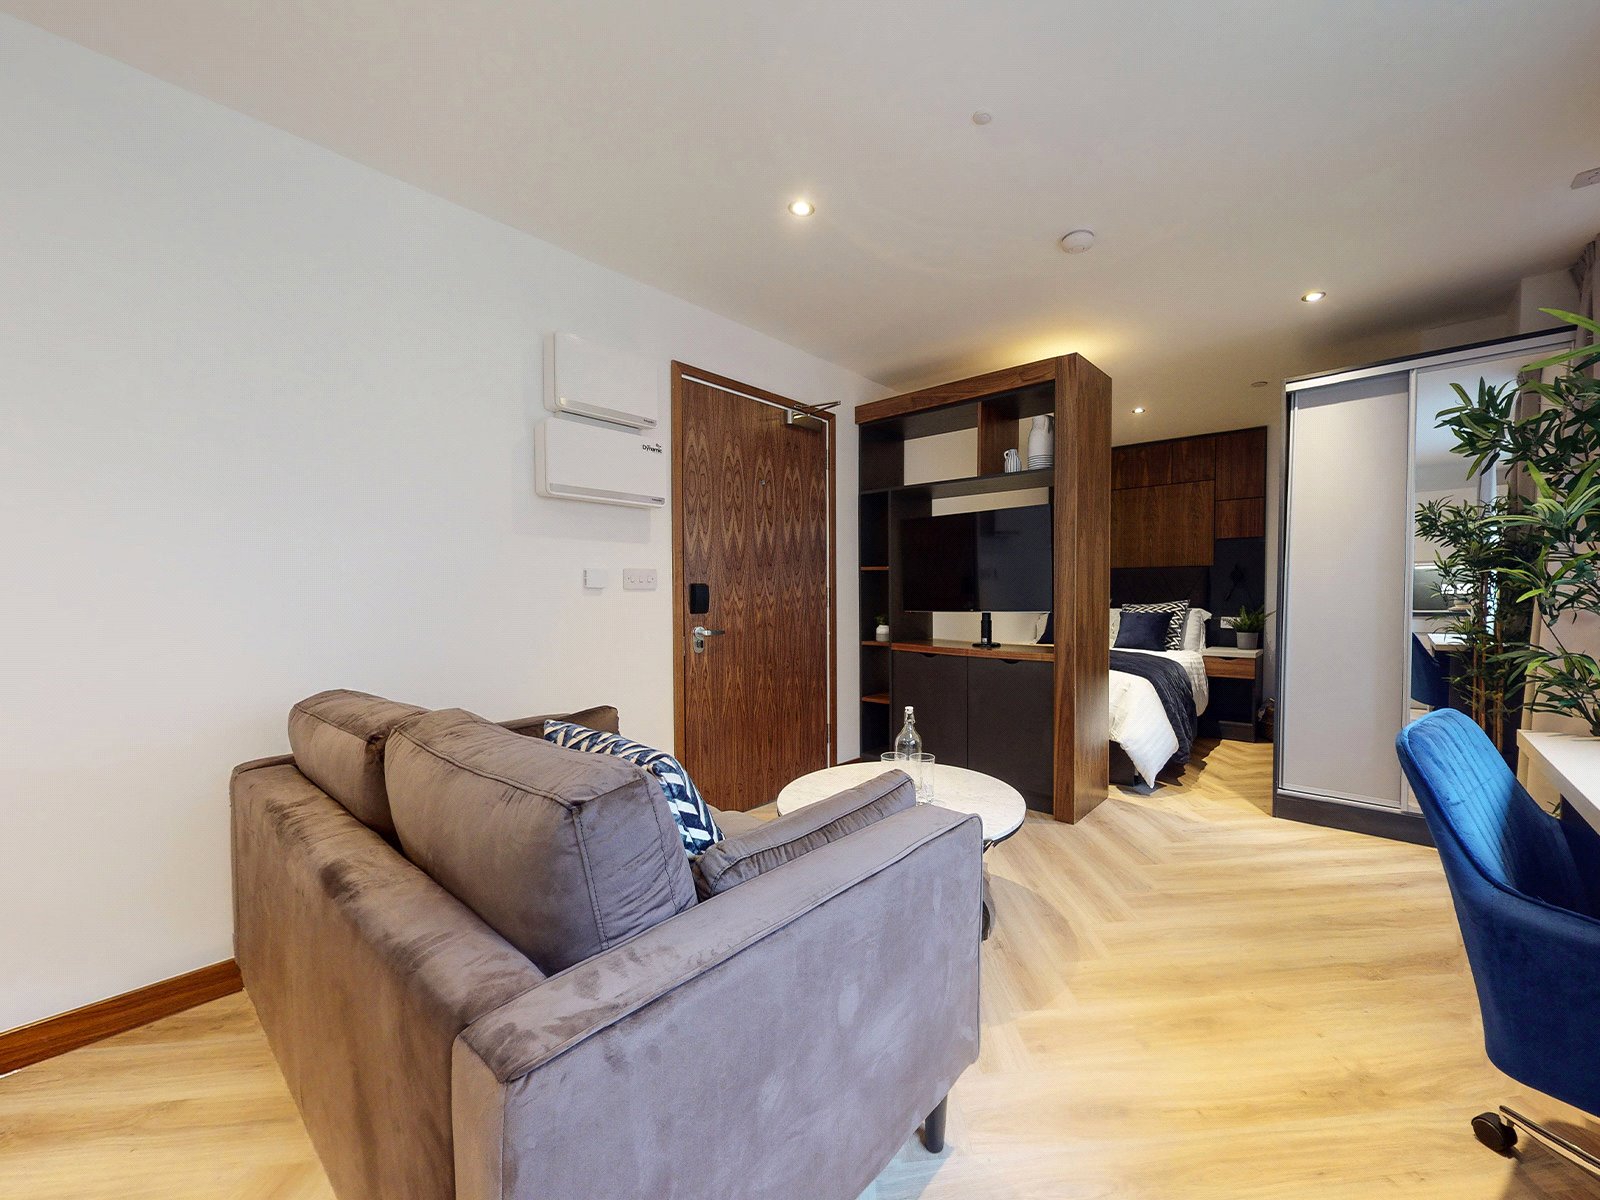 0 bed apartment for rent in Manchester. From YPP - Sheffield